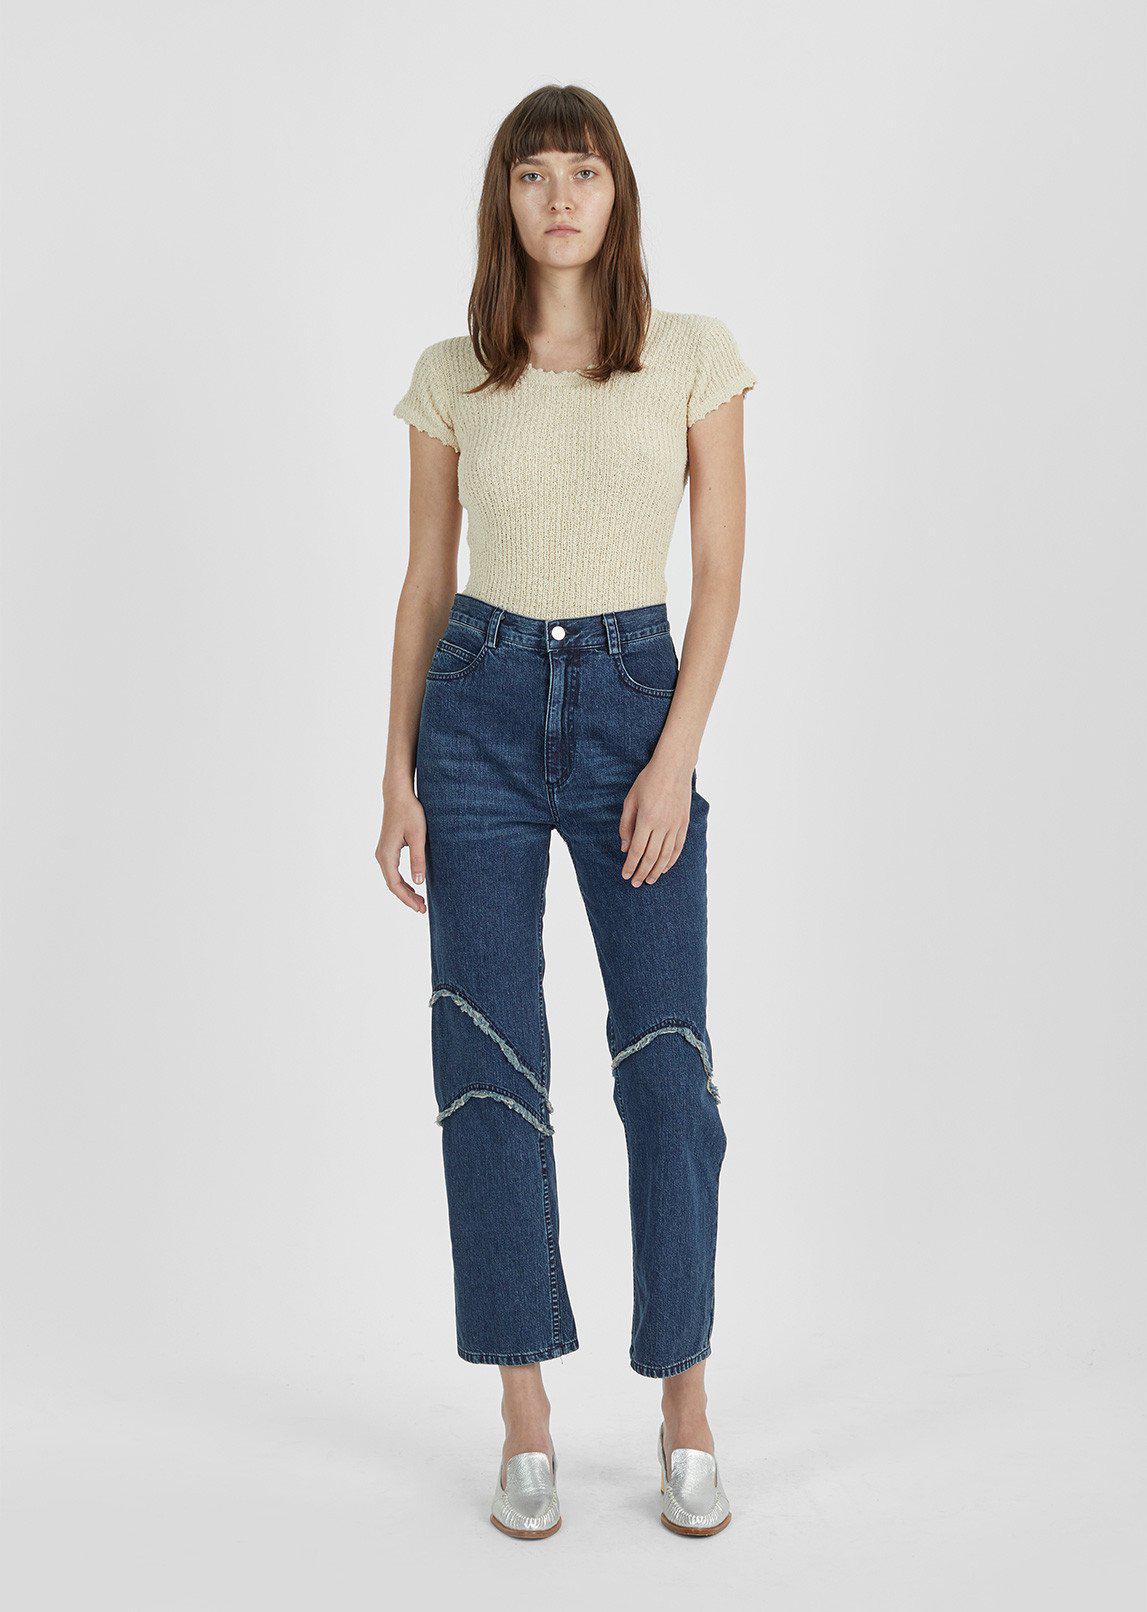 Rachel Comey Denim Ticklers High Waisted Straight Jeans in Blue - Lyst